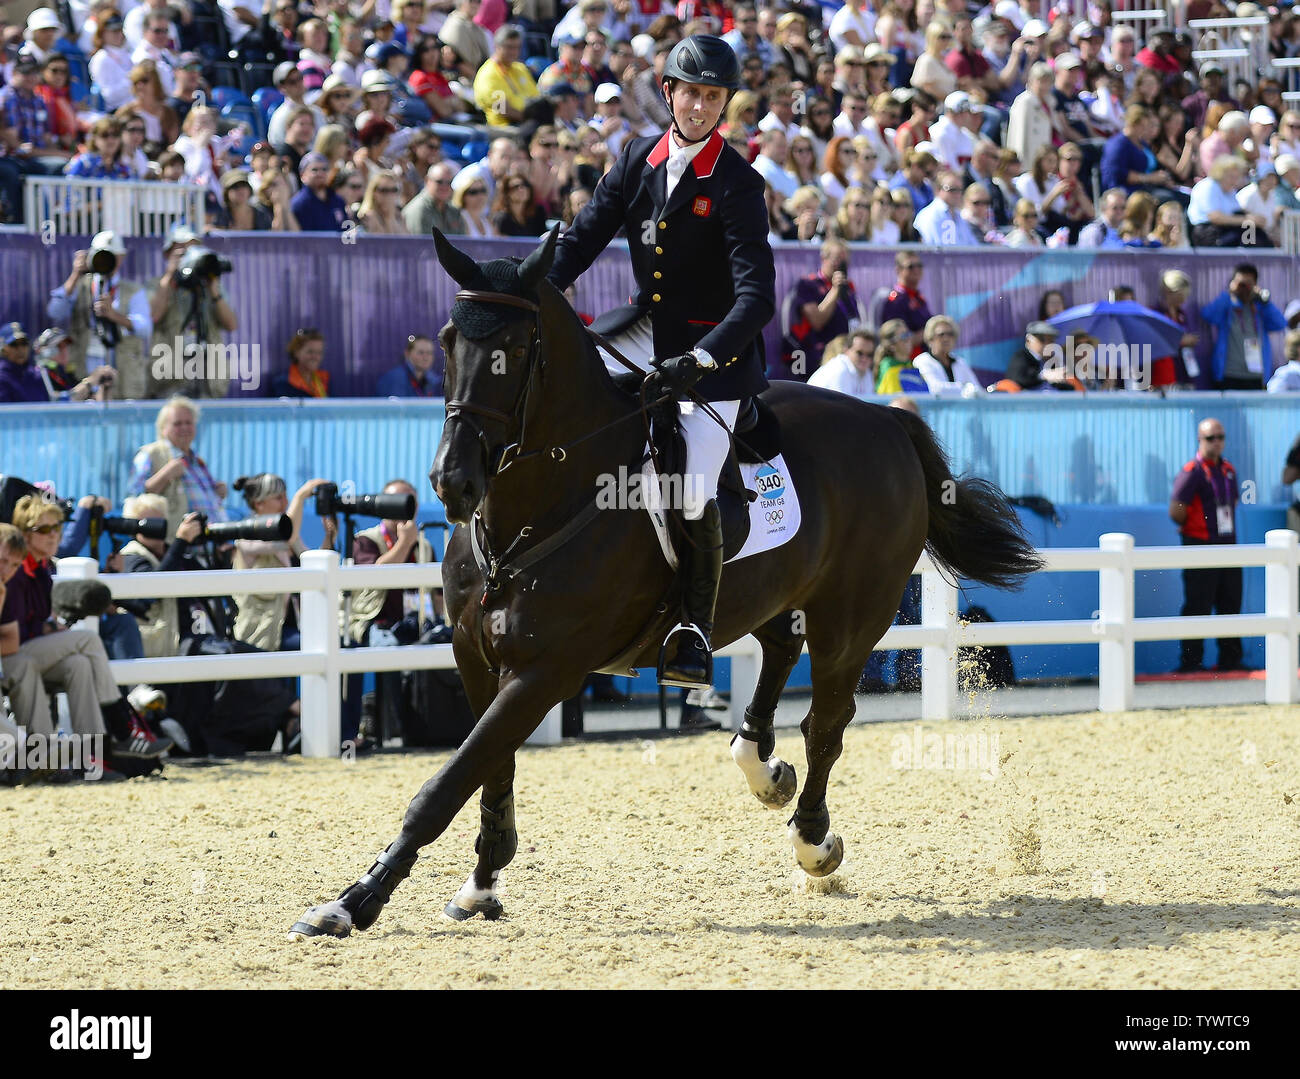 Ben Maher of Great Britain, riding Tripple X, competes in the Equestrian the 3rd Qualifier Individual competition and round 2 of the Team Jumping competition at the London 2012 Summer Olympics on August 5, 2012 in London.  The team from Great Britain captured the Gold Medal after a 'Jump Off' against the Netherlands.   UPI/Ron Sachs Stock Photo